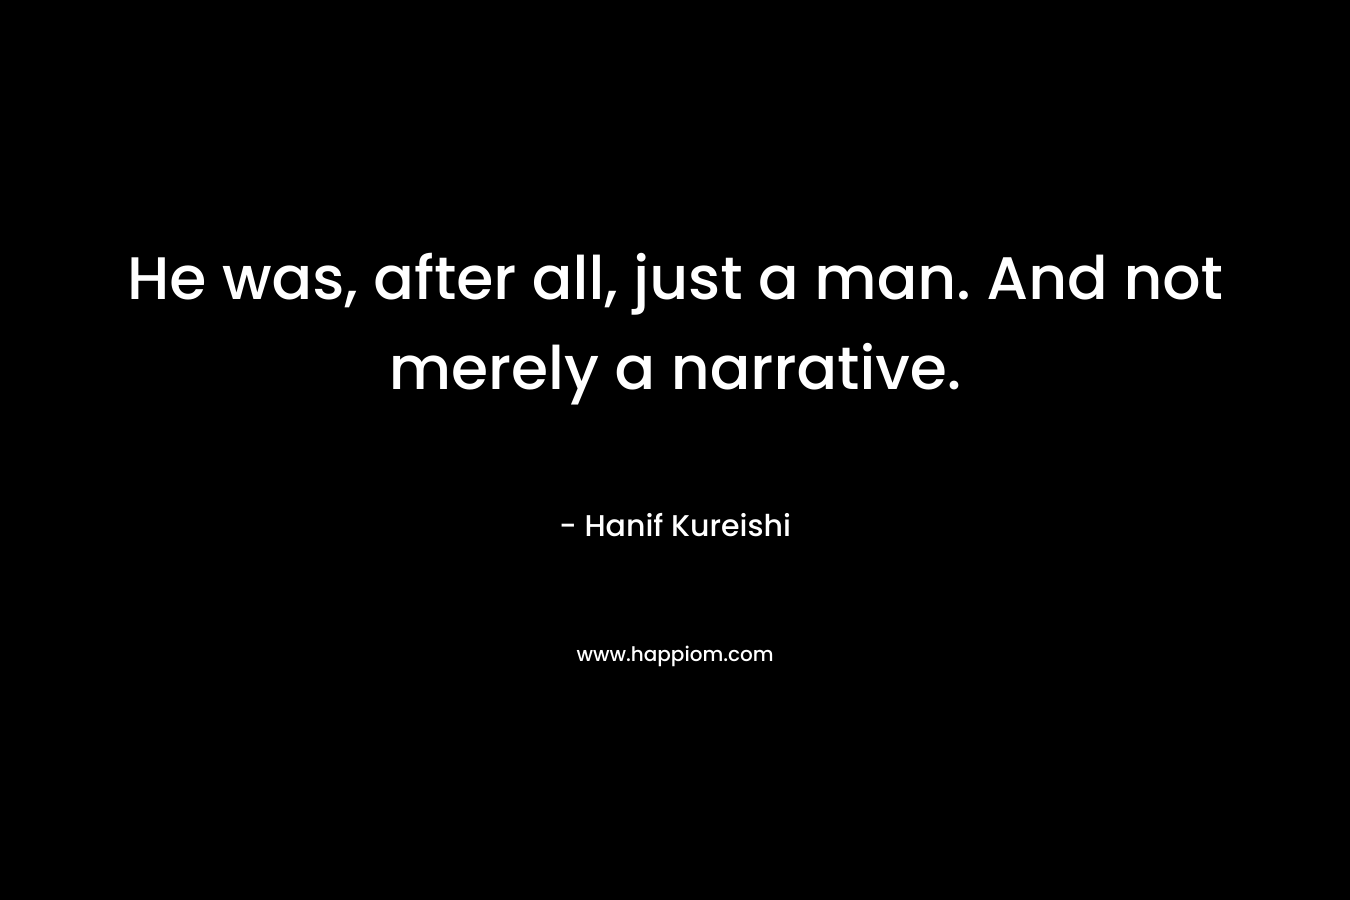 He was, after all, just a man. And not merely a narrative. – Hanif Kureishi